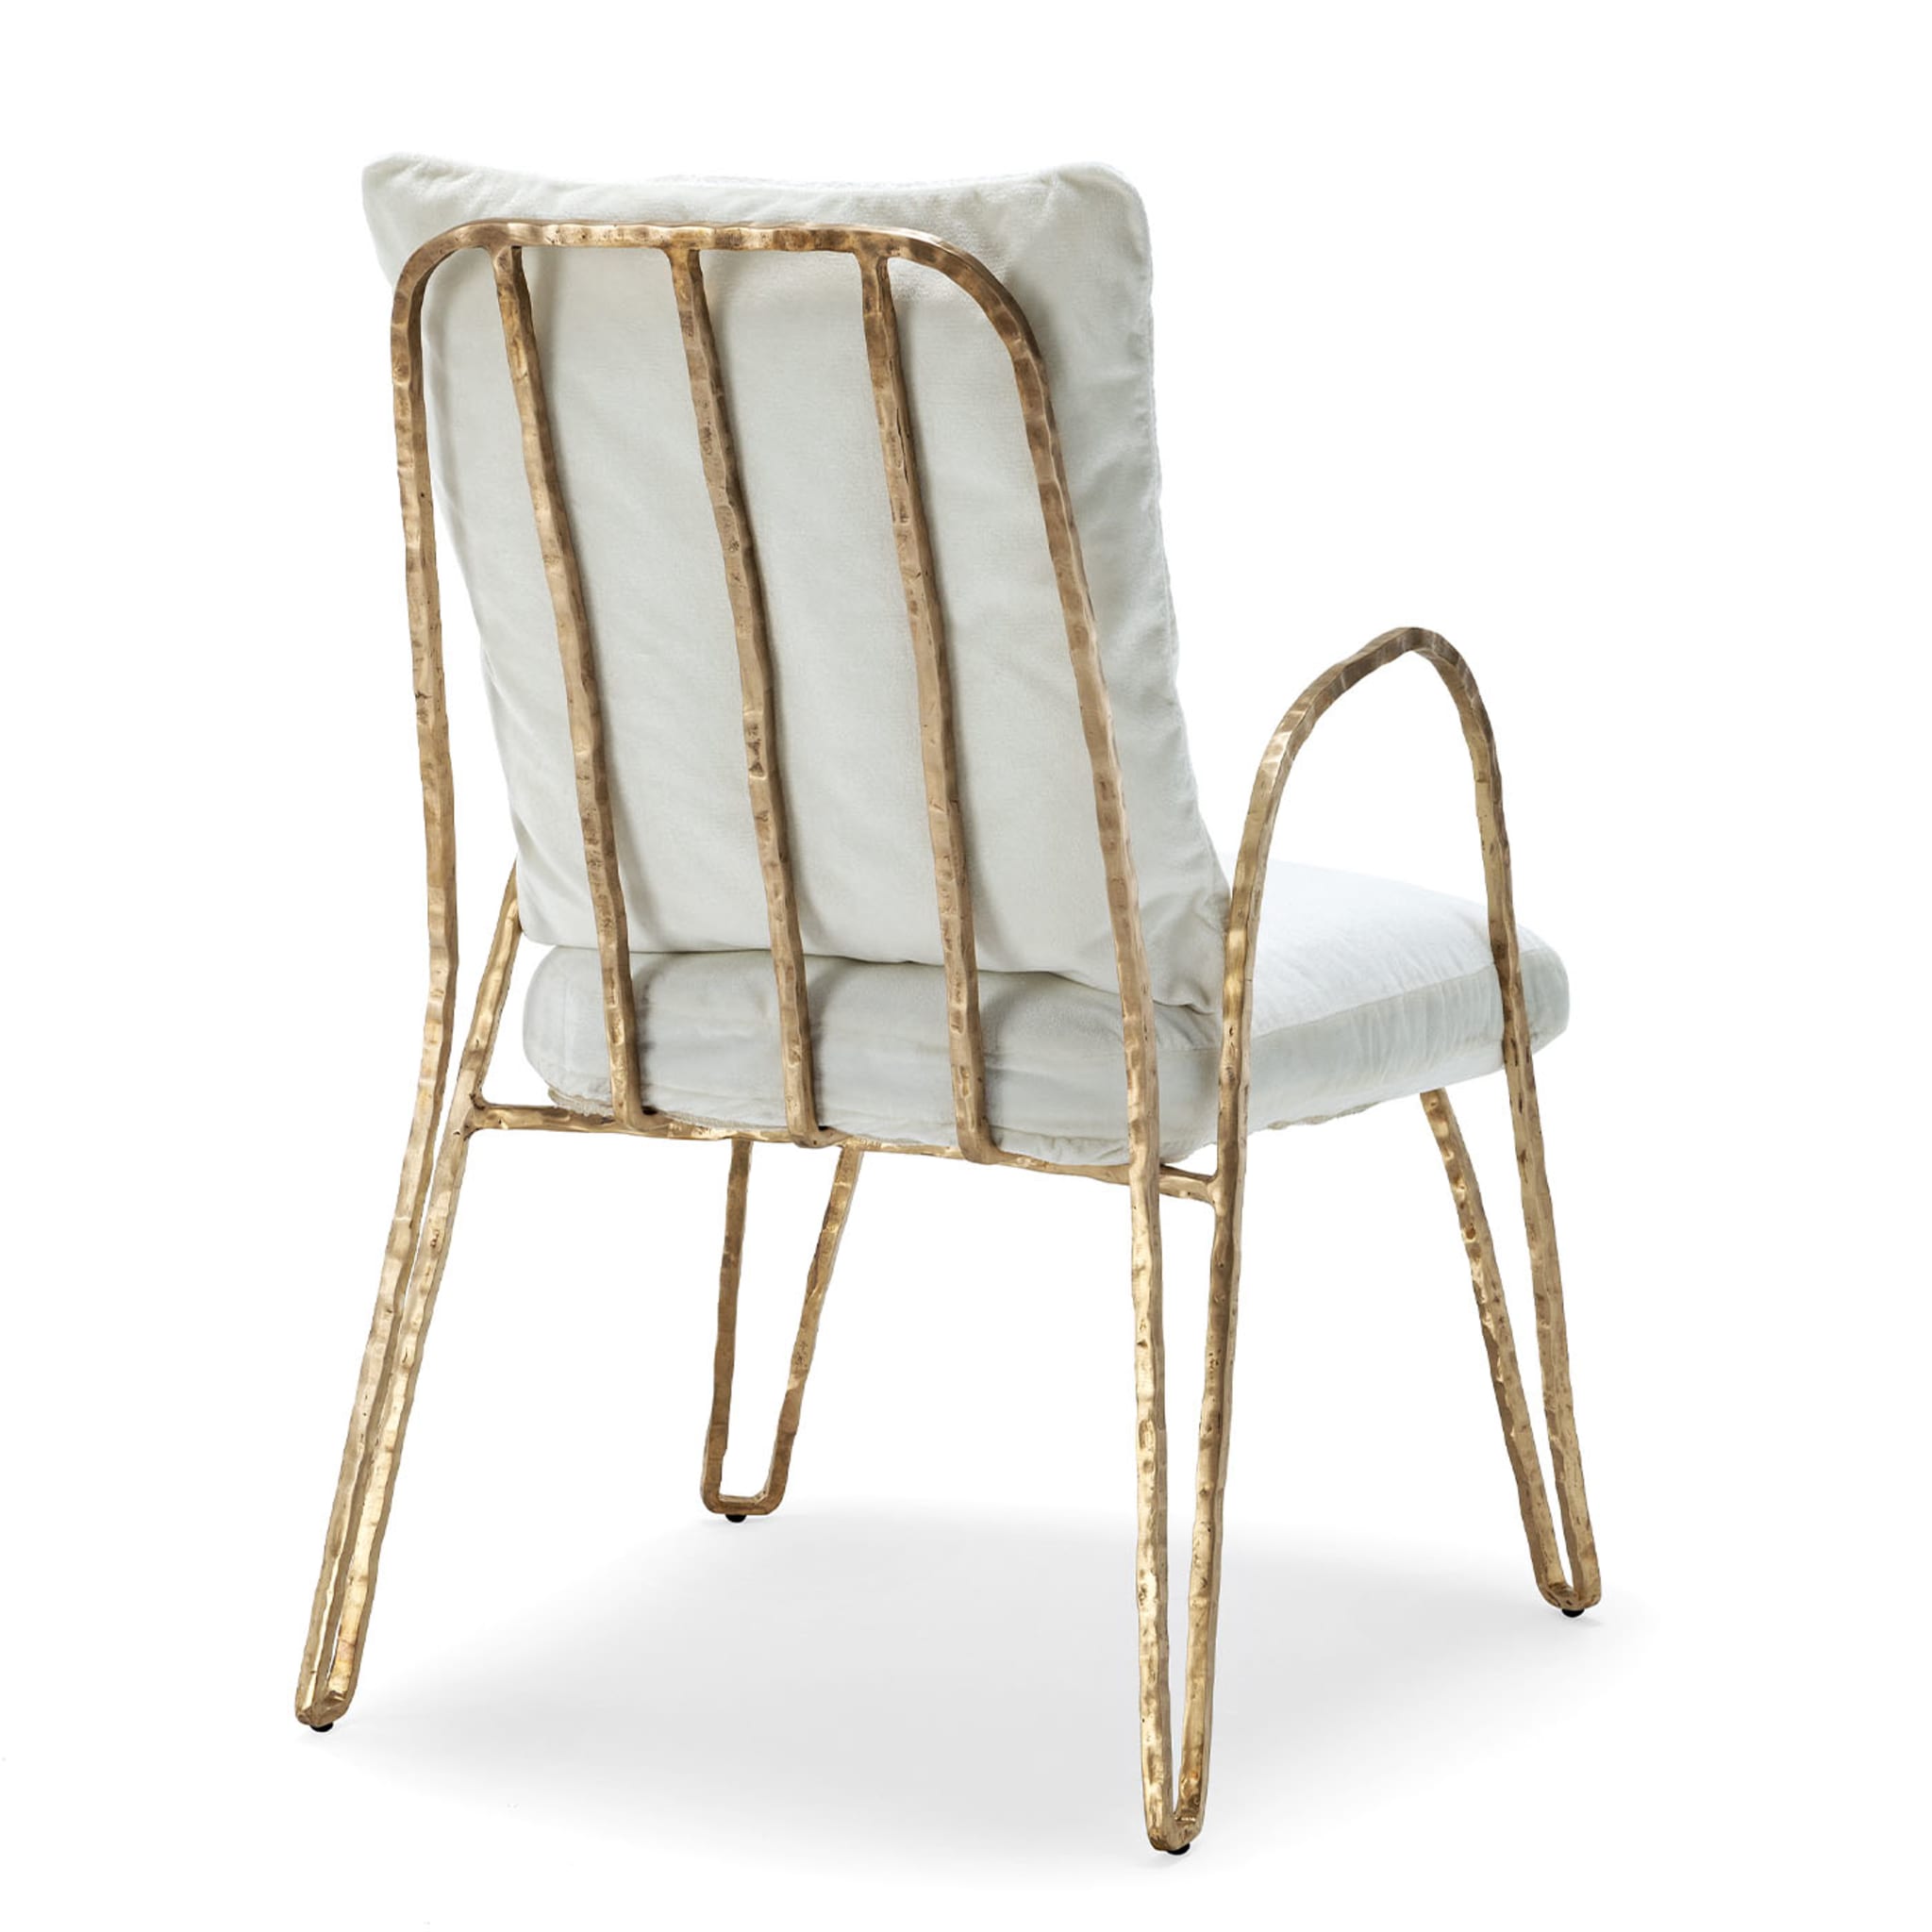 Moonlight White and Gold High Chair - Alternative view 3